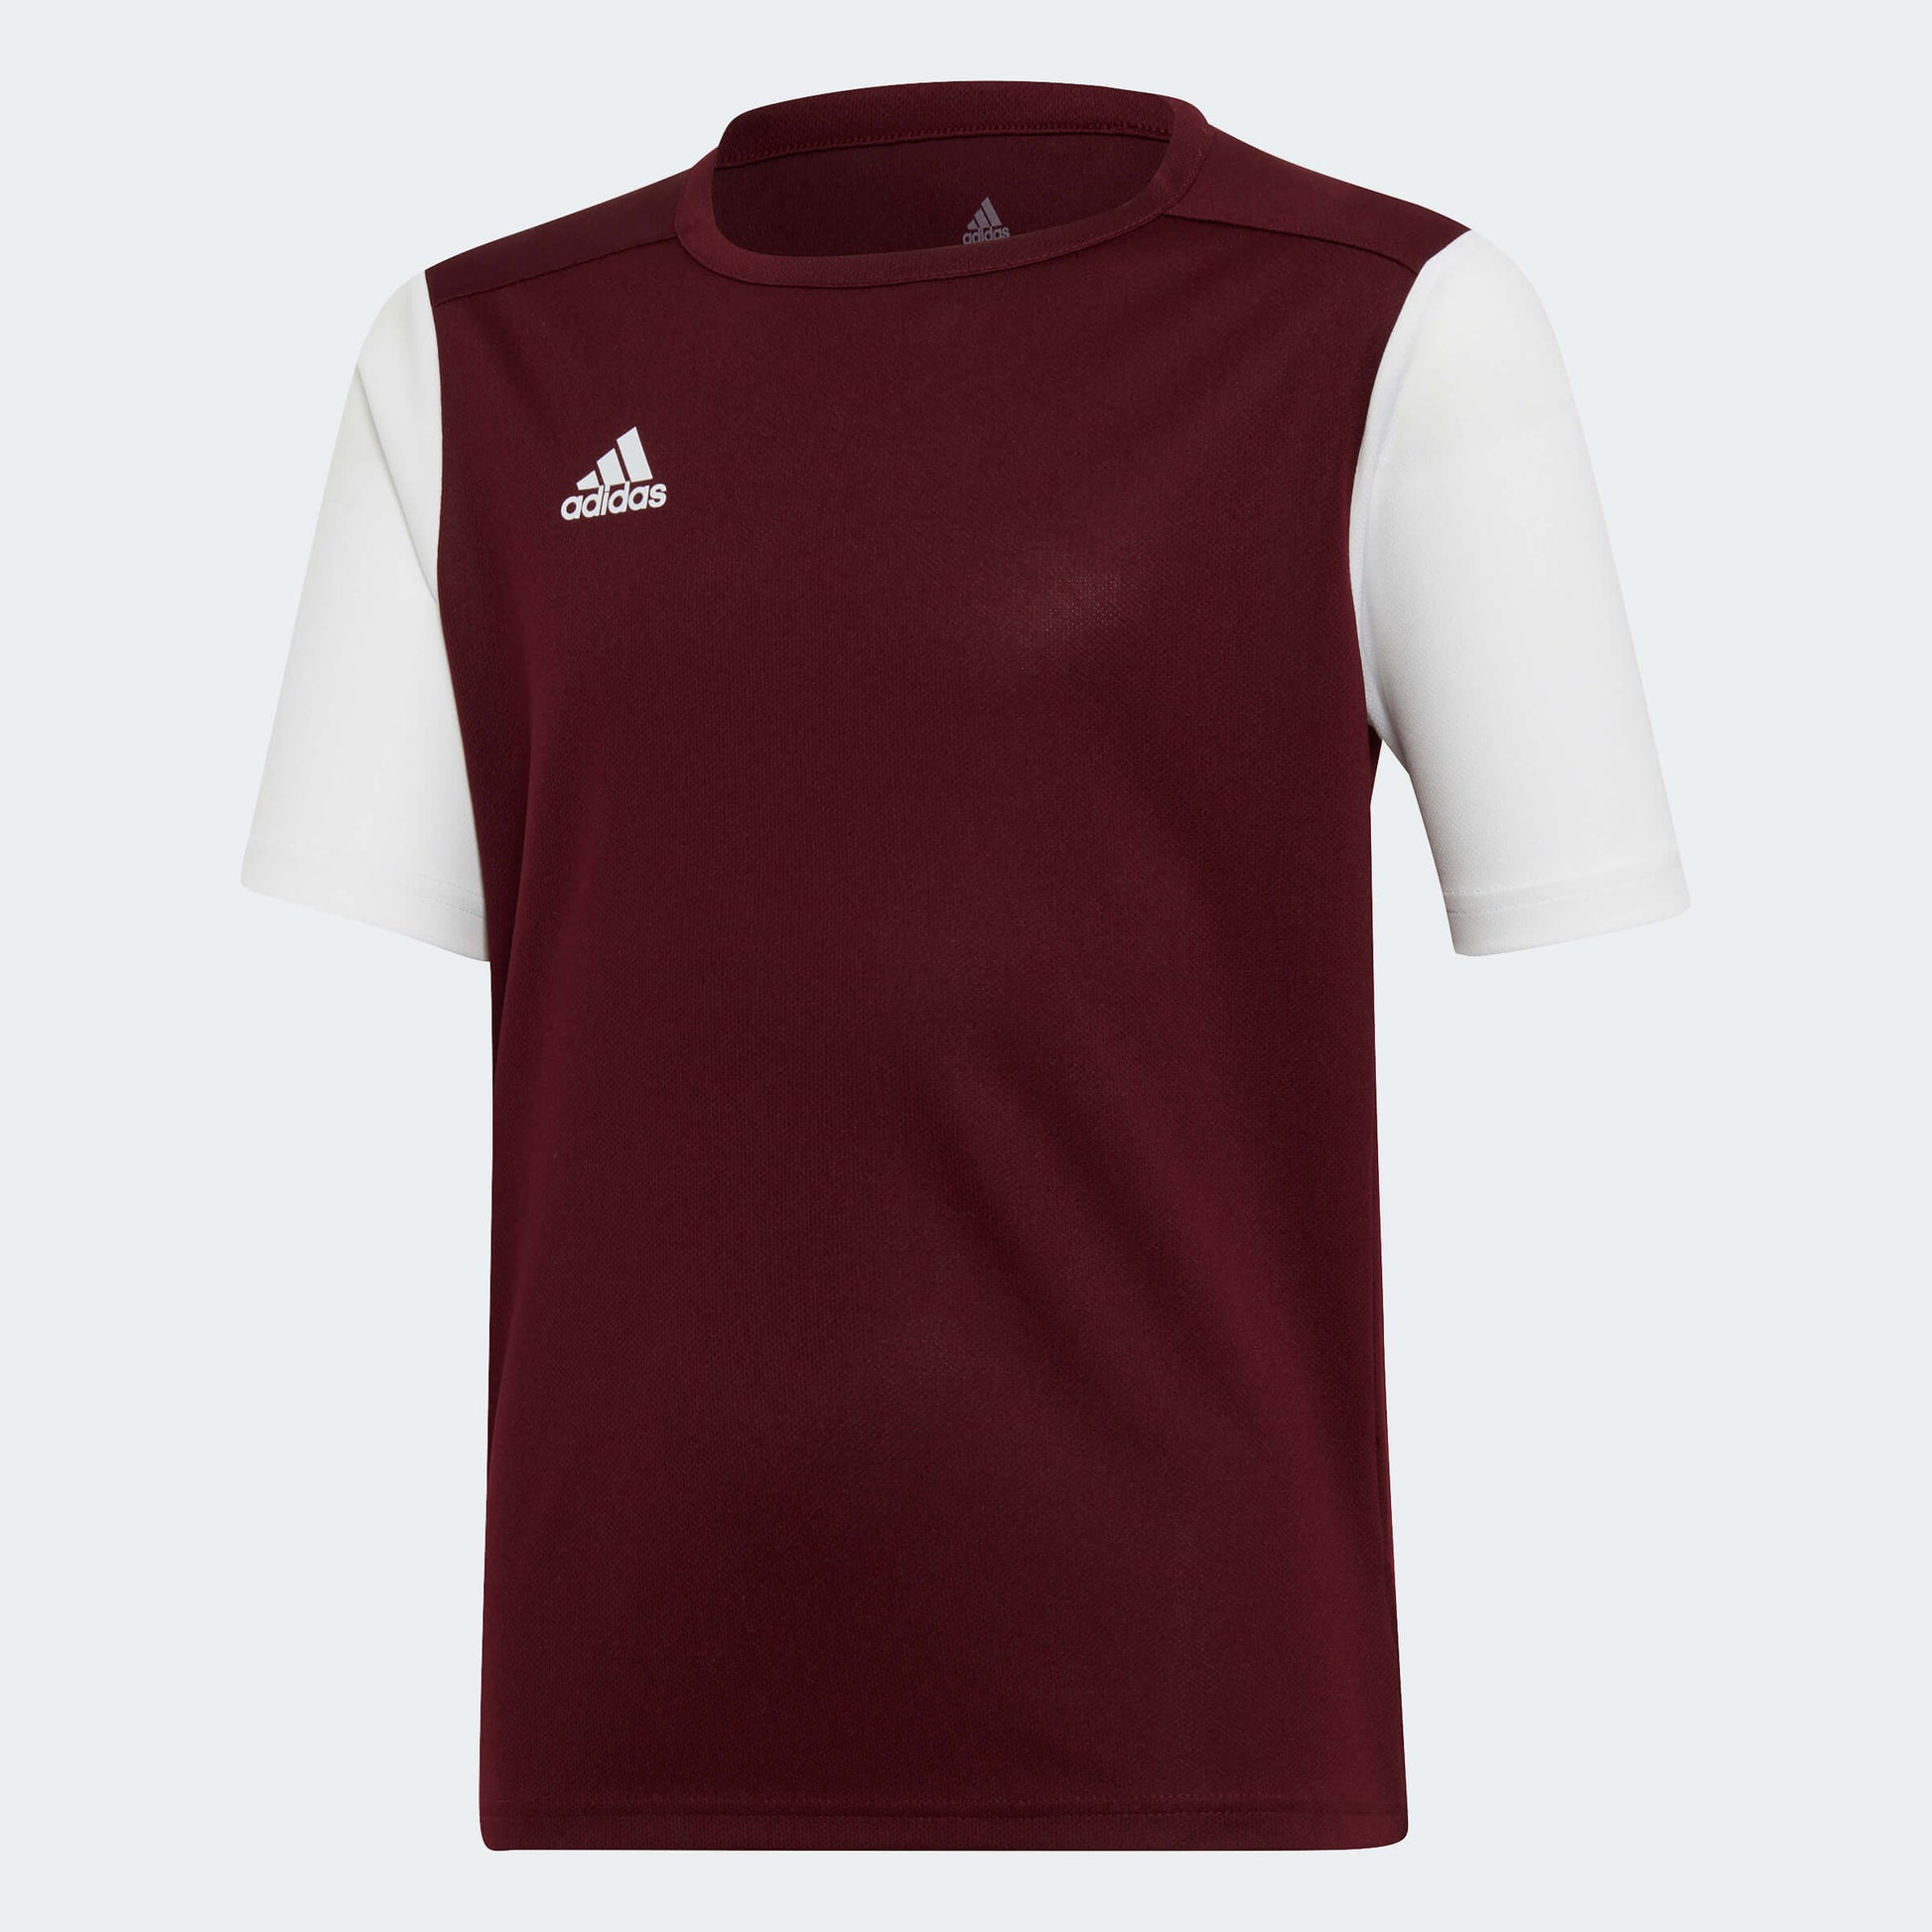 adidas YOUTH Estro 19 Jersey Maroon-White (Front)